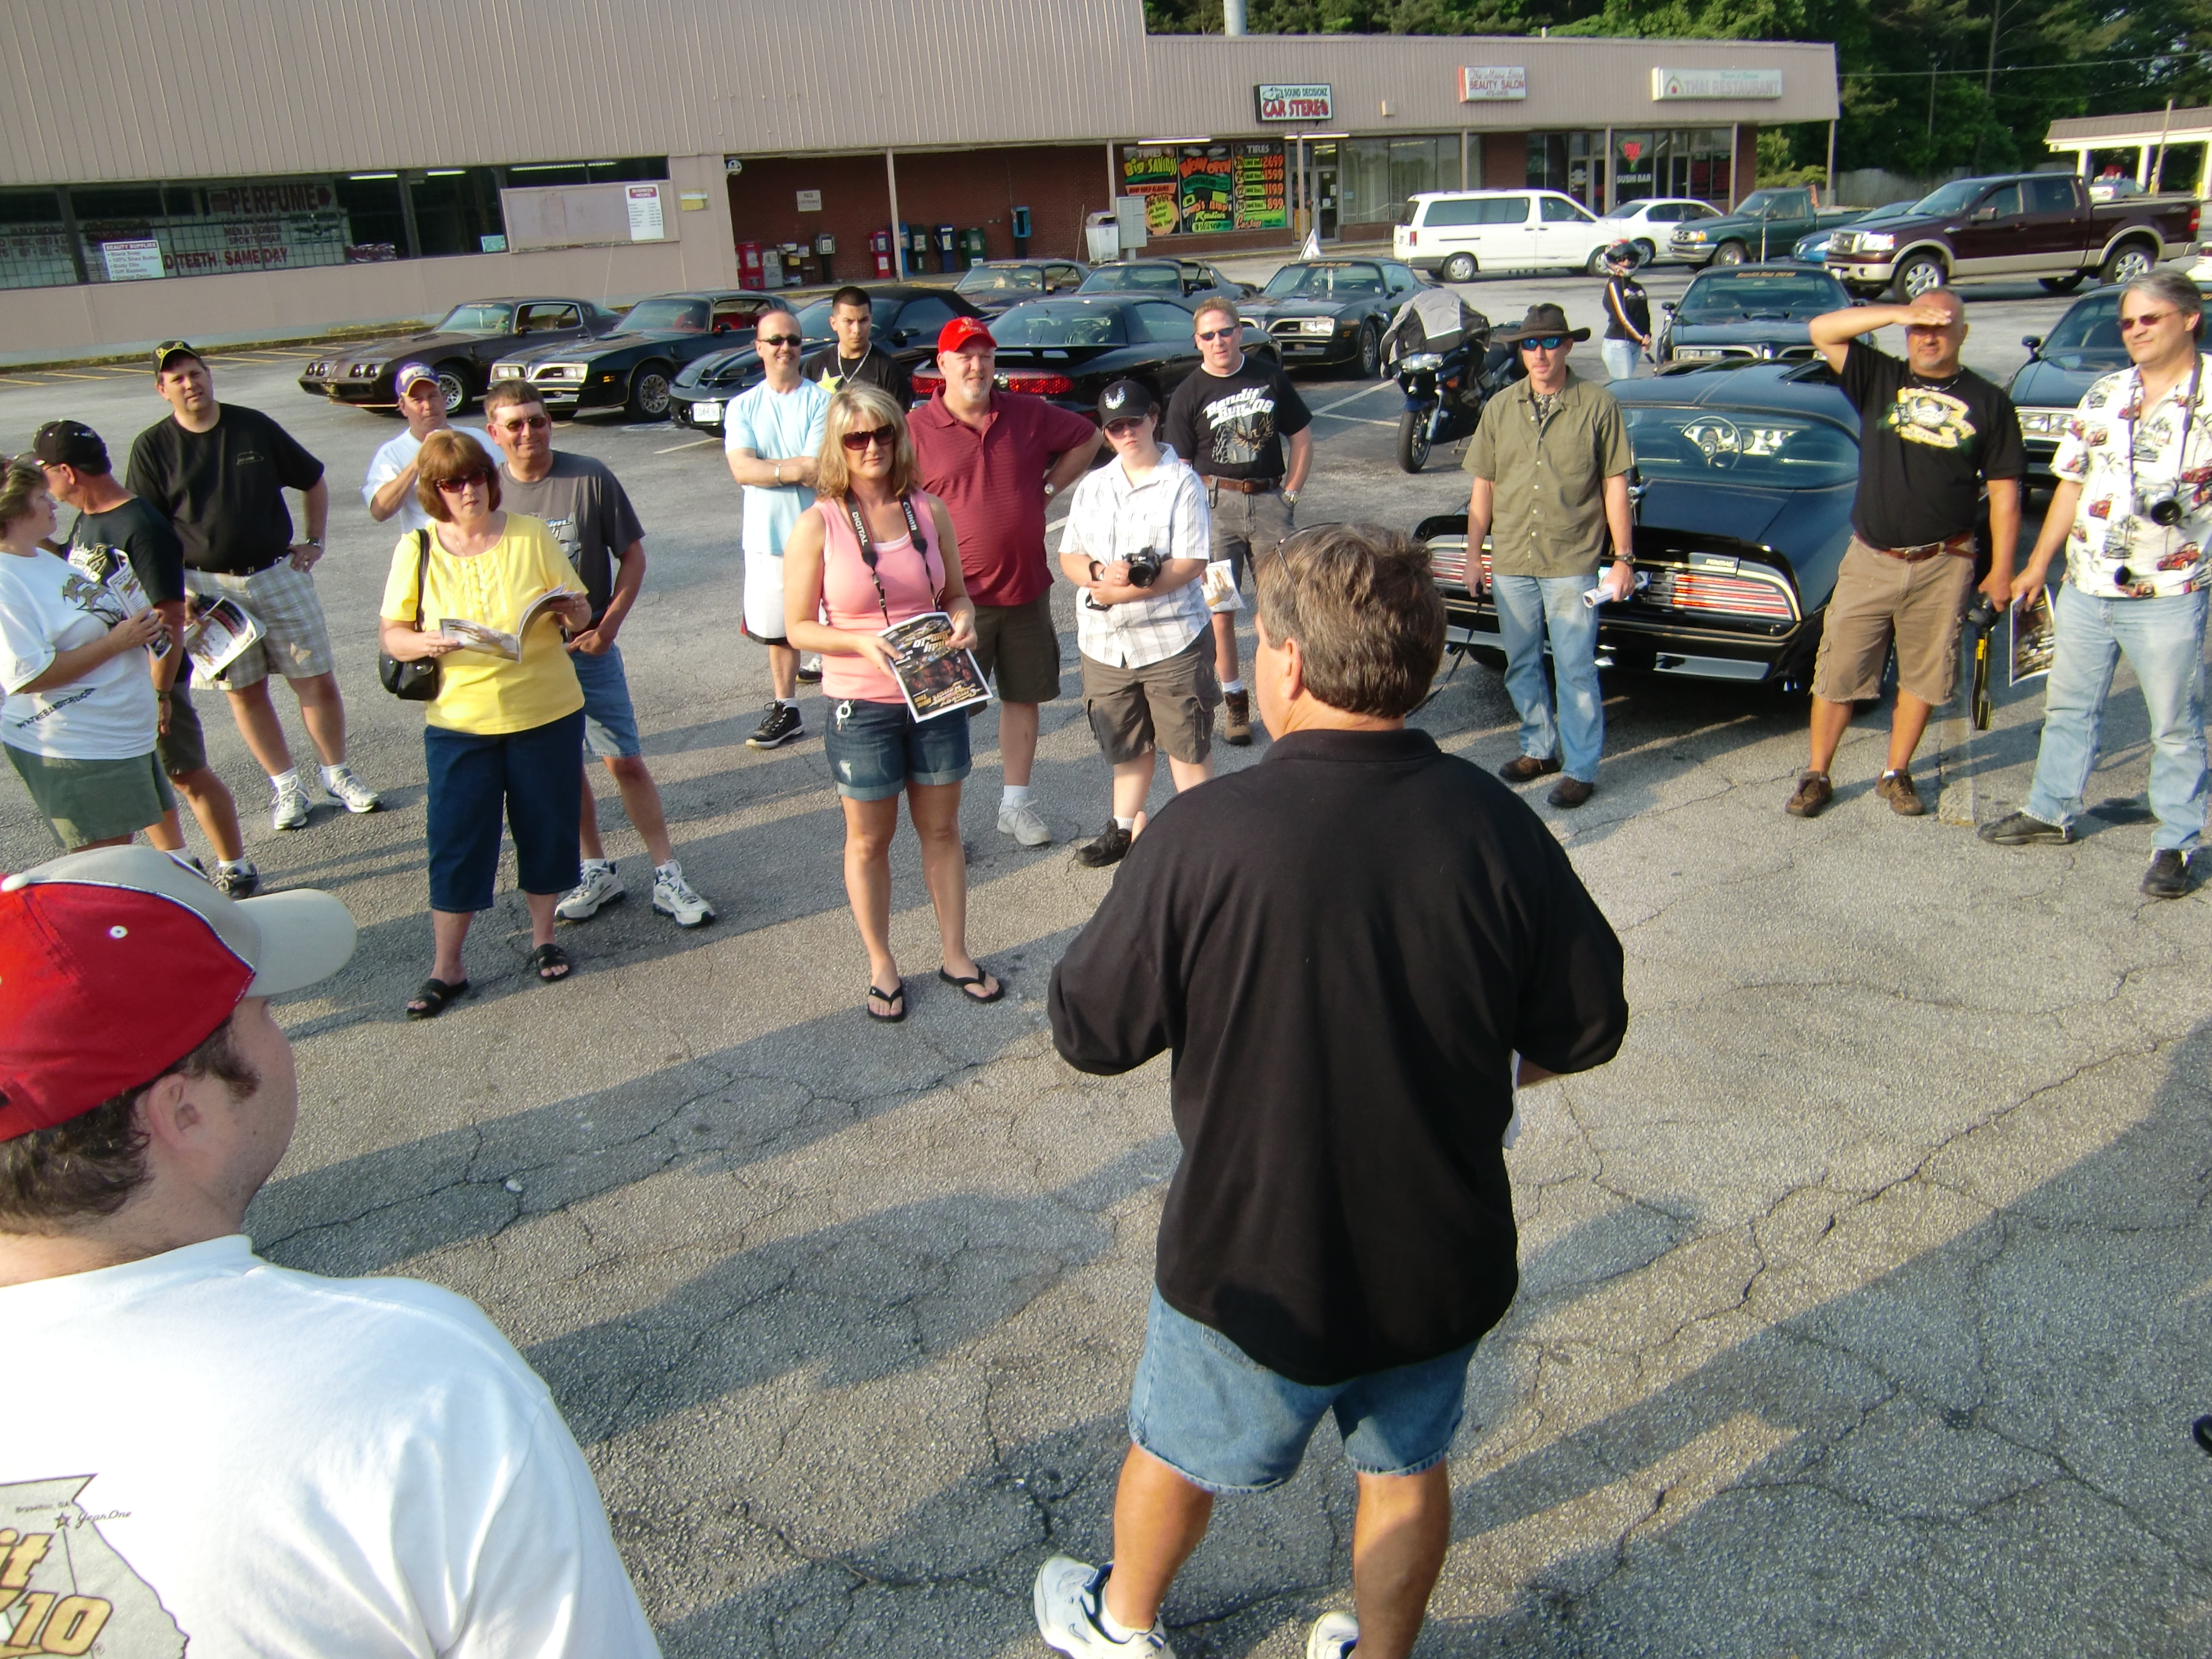 Participants in the Bandit Run gather to discuss the tour of filming locations